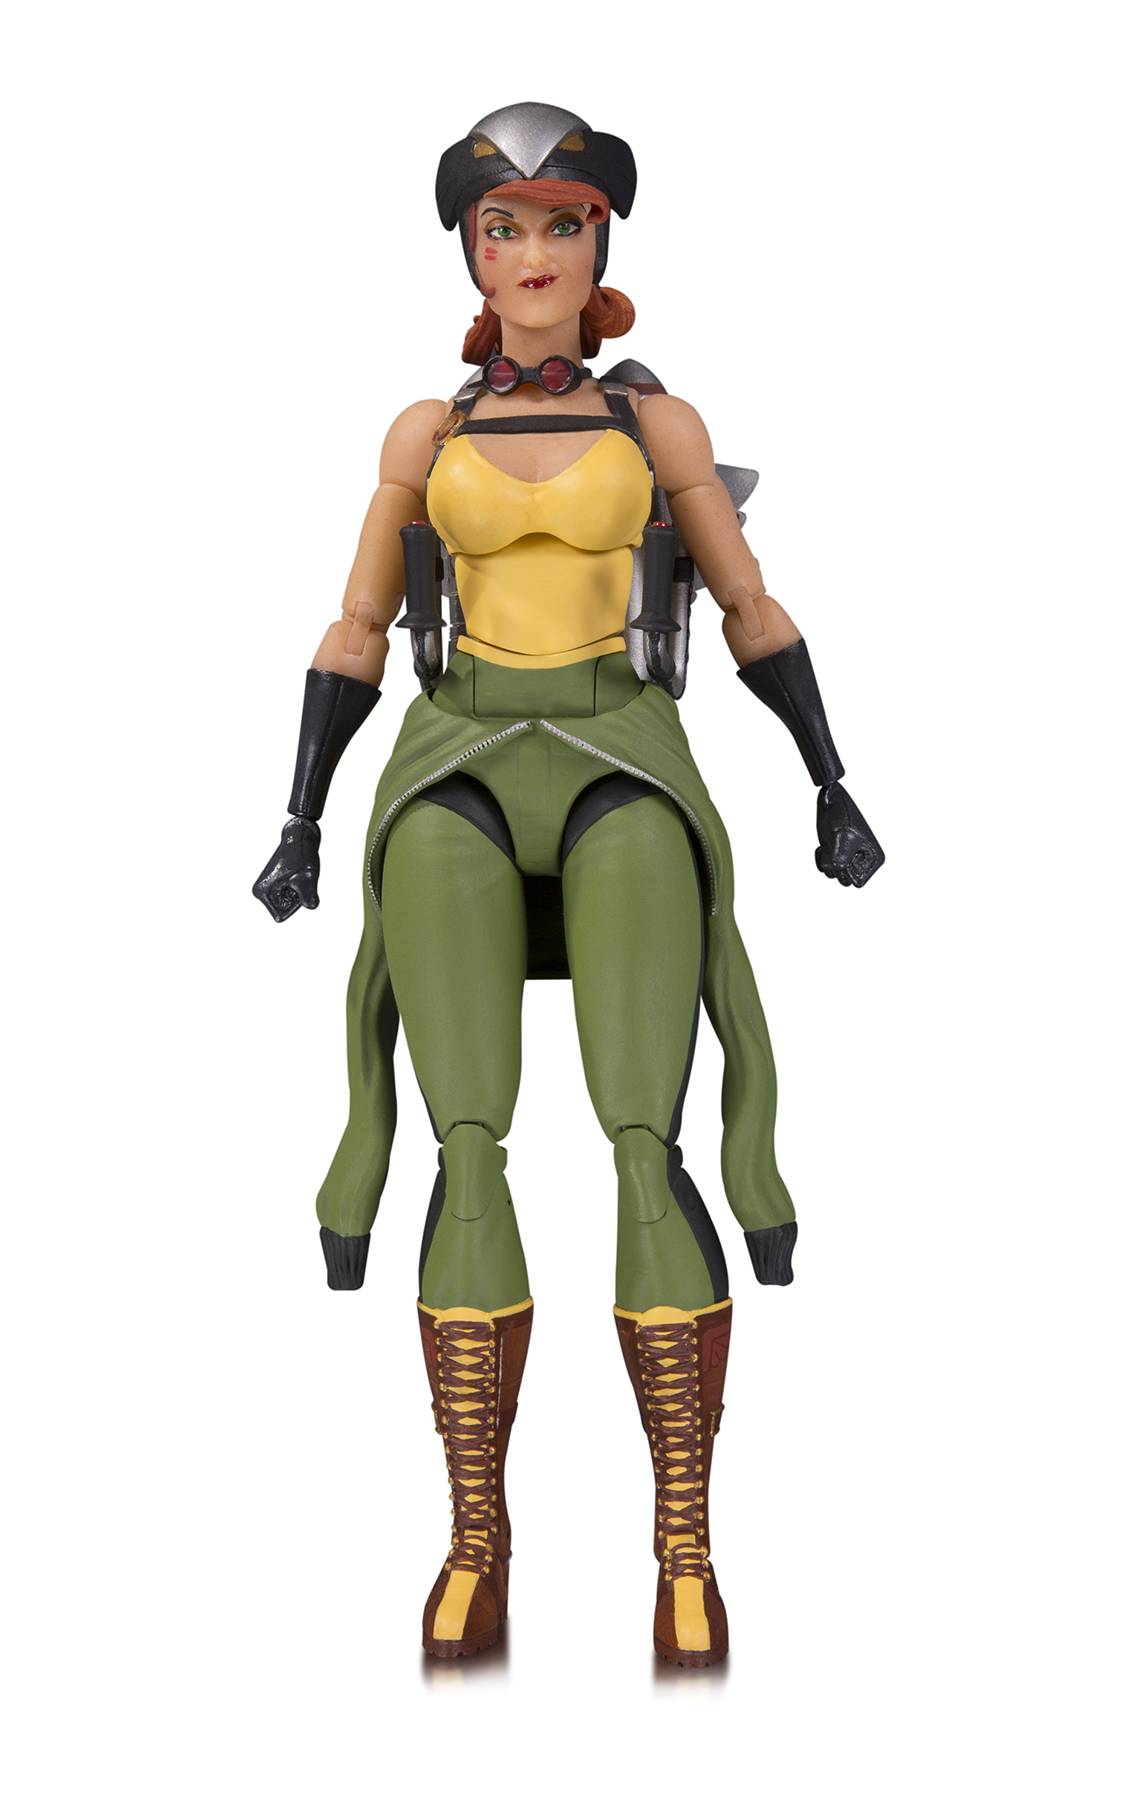 DC DESIGNER SERIES: DC BOMBSHELL HAWKGIRL ANT LUCIA | BD Cosmos